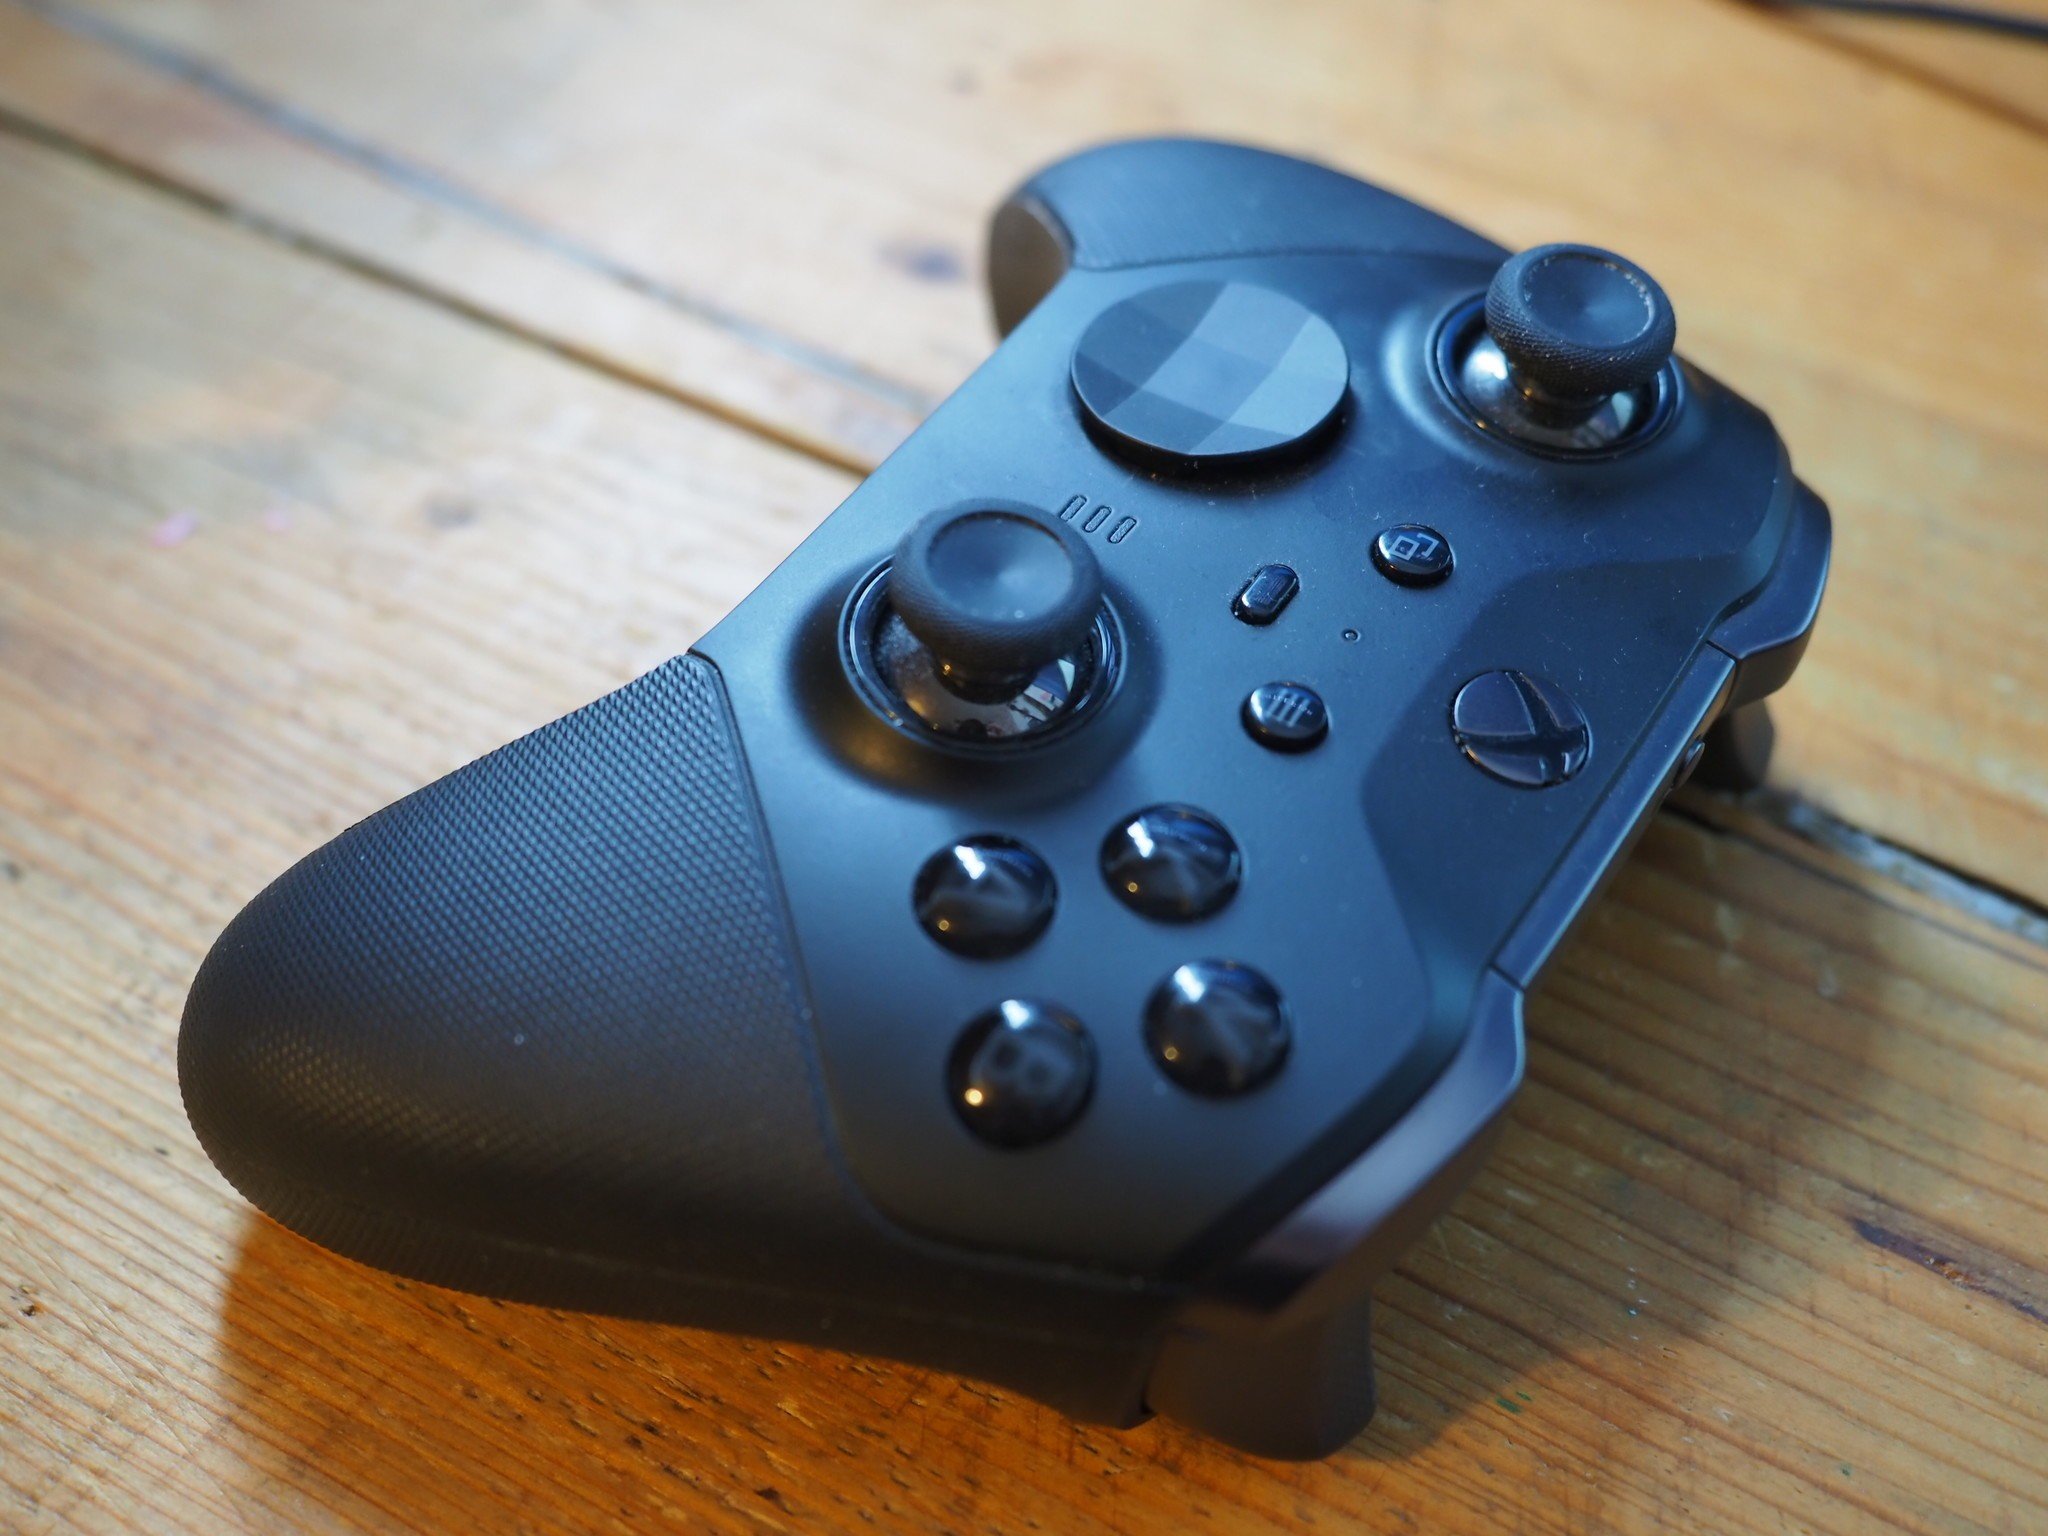 Xbox Elite Series 2 Core controller review: It's more of the same